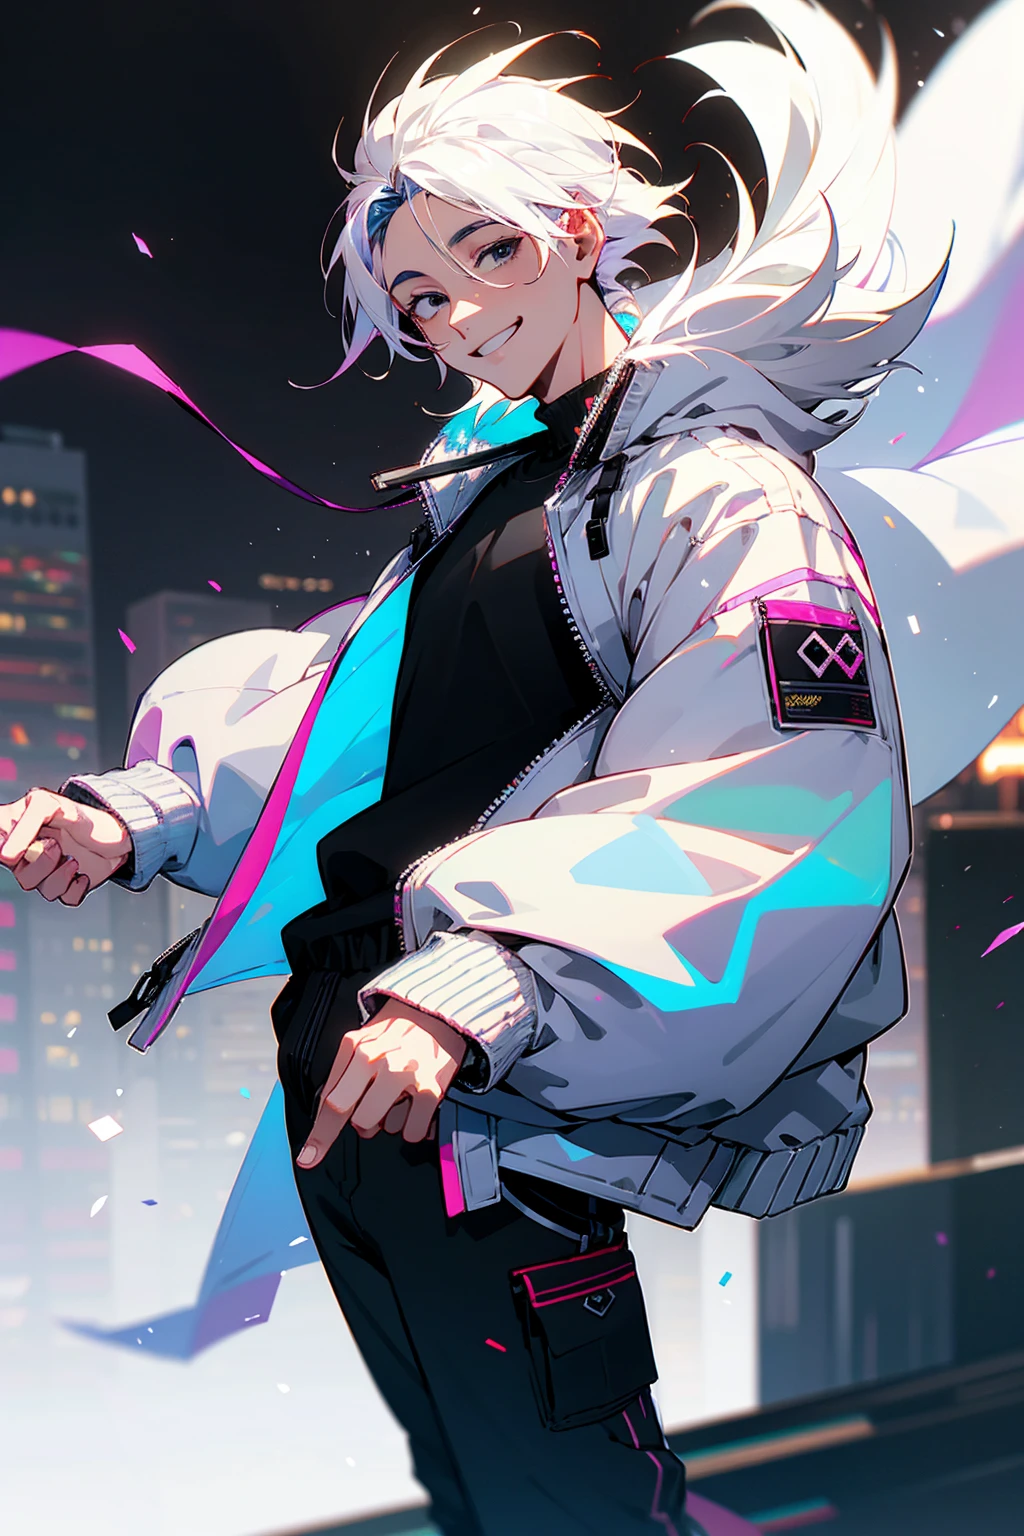 1male, iridescent hair, short hair, black eyes, smiling, open white jacket, baggy black joggers, city background, detailed background, hands to side, standing on path